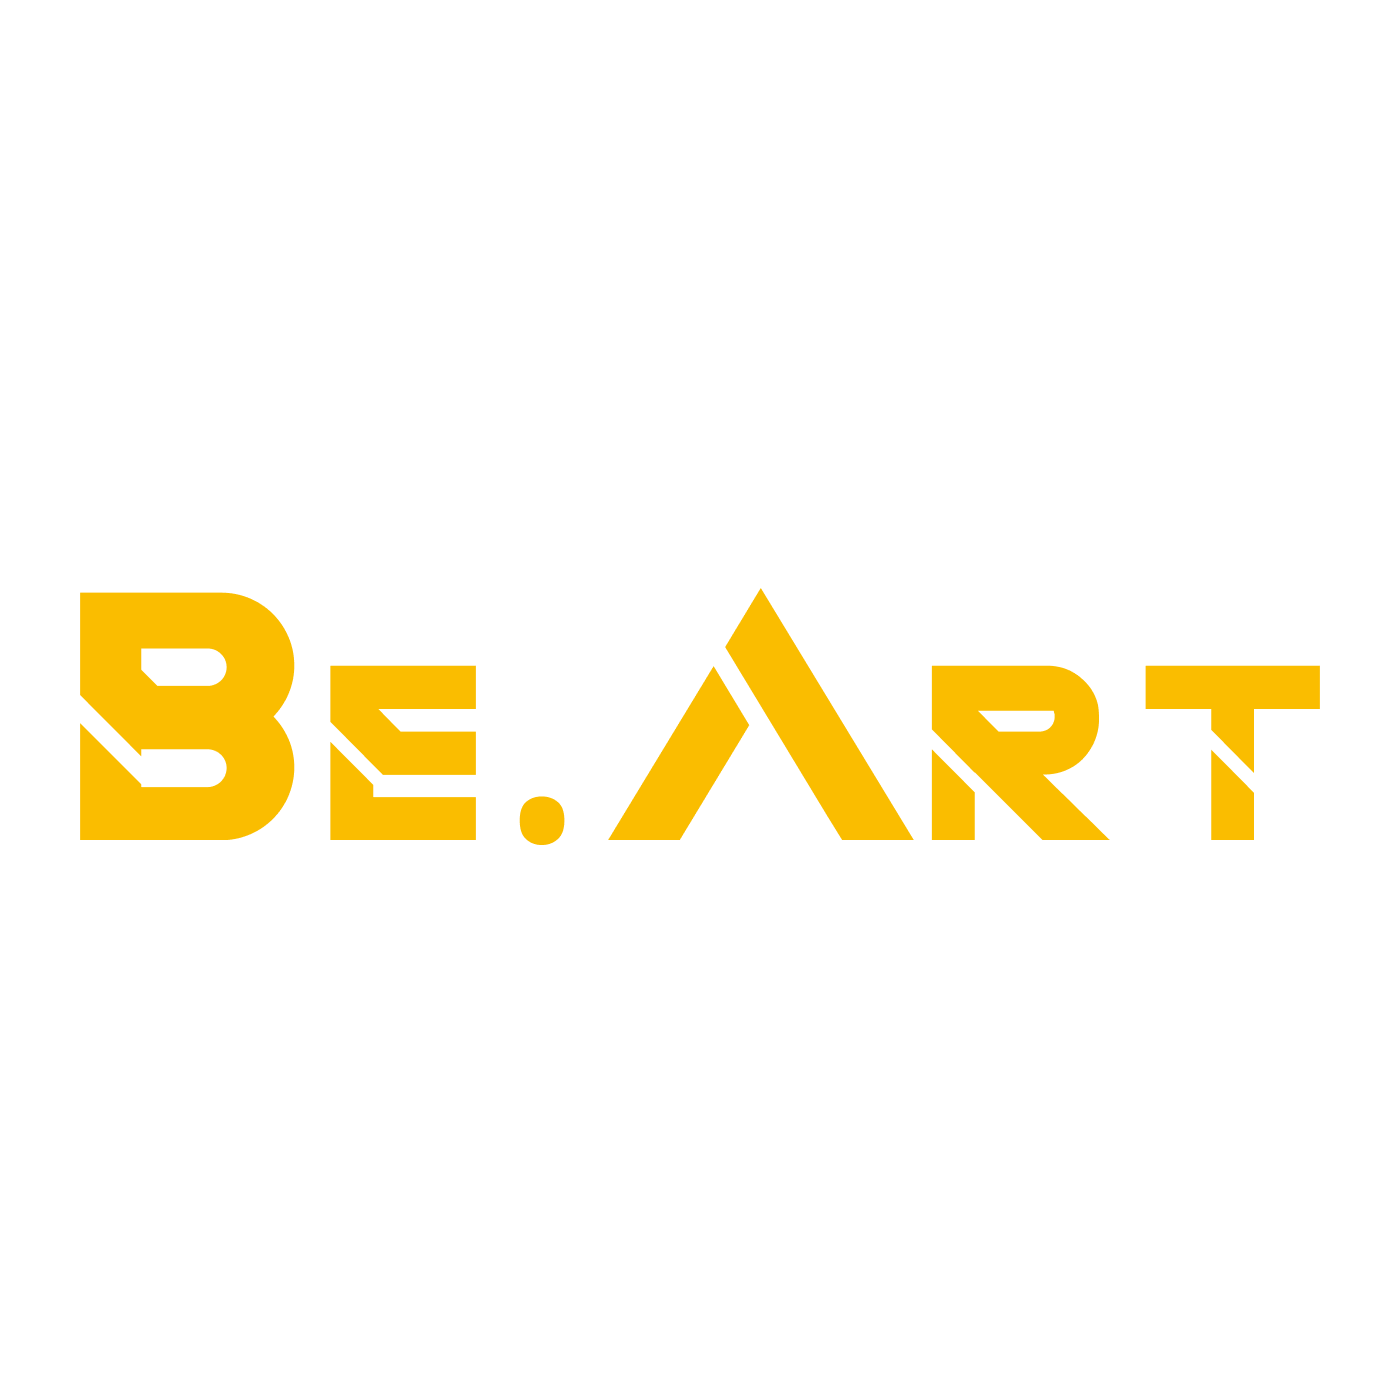 Welcome to Be.Art, enjoy art and gain asset appreciation